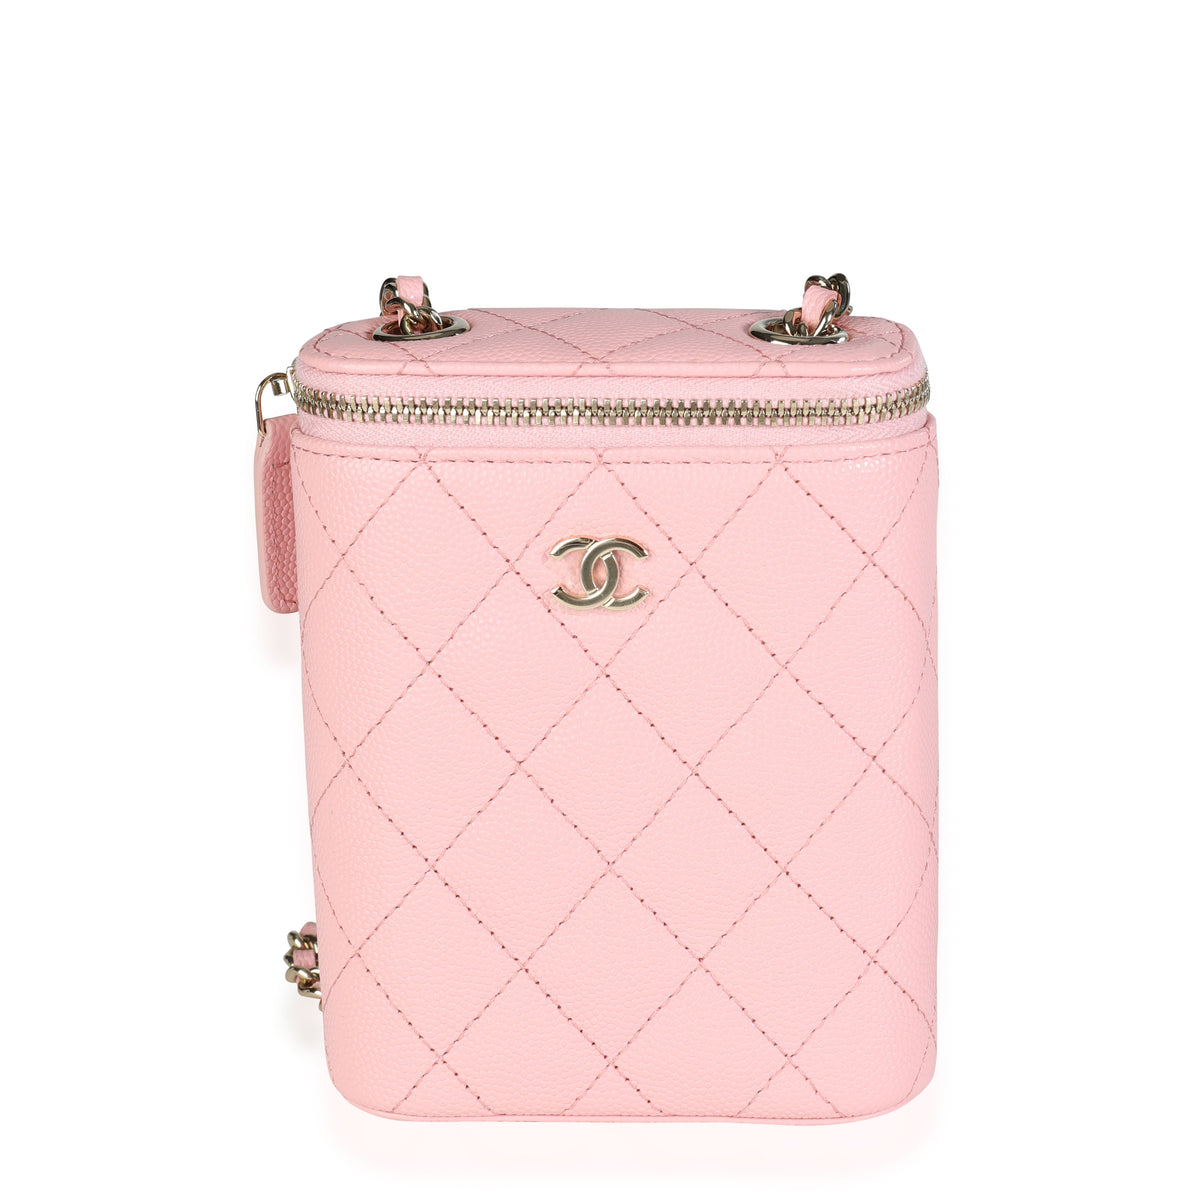 Complete Review of the Chanel Vanity Bag  Handbags and Accessories   Sothebys